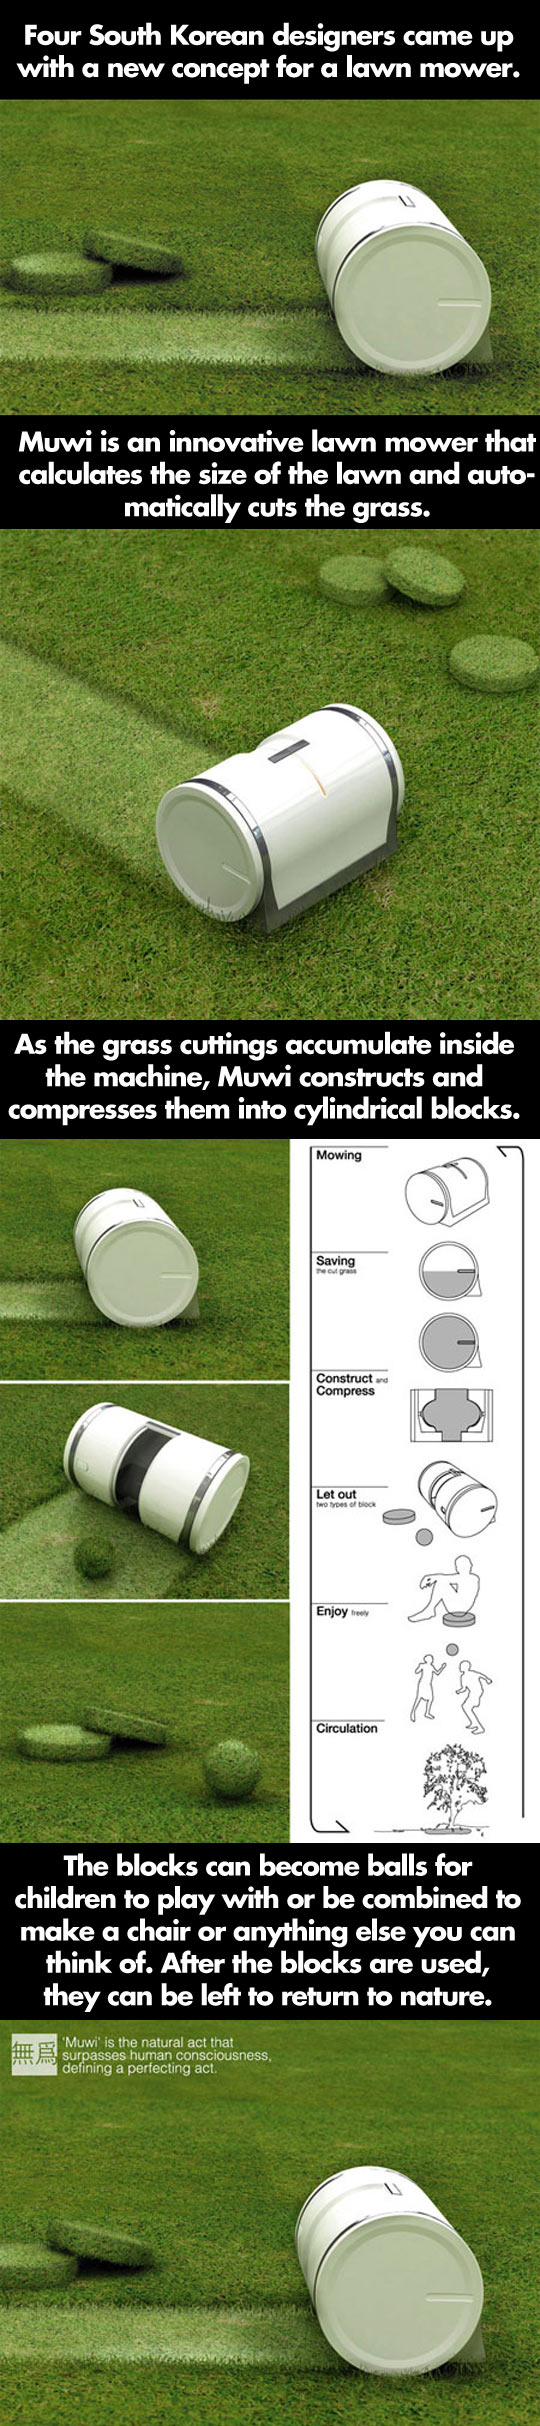 New concept for a lawn mower - Lawn balls.